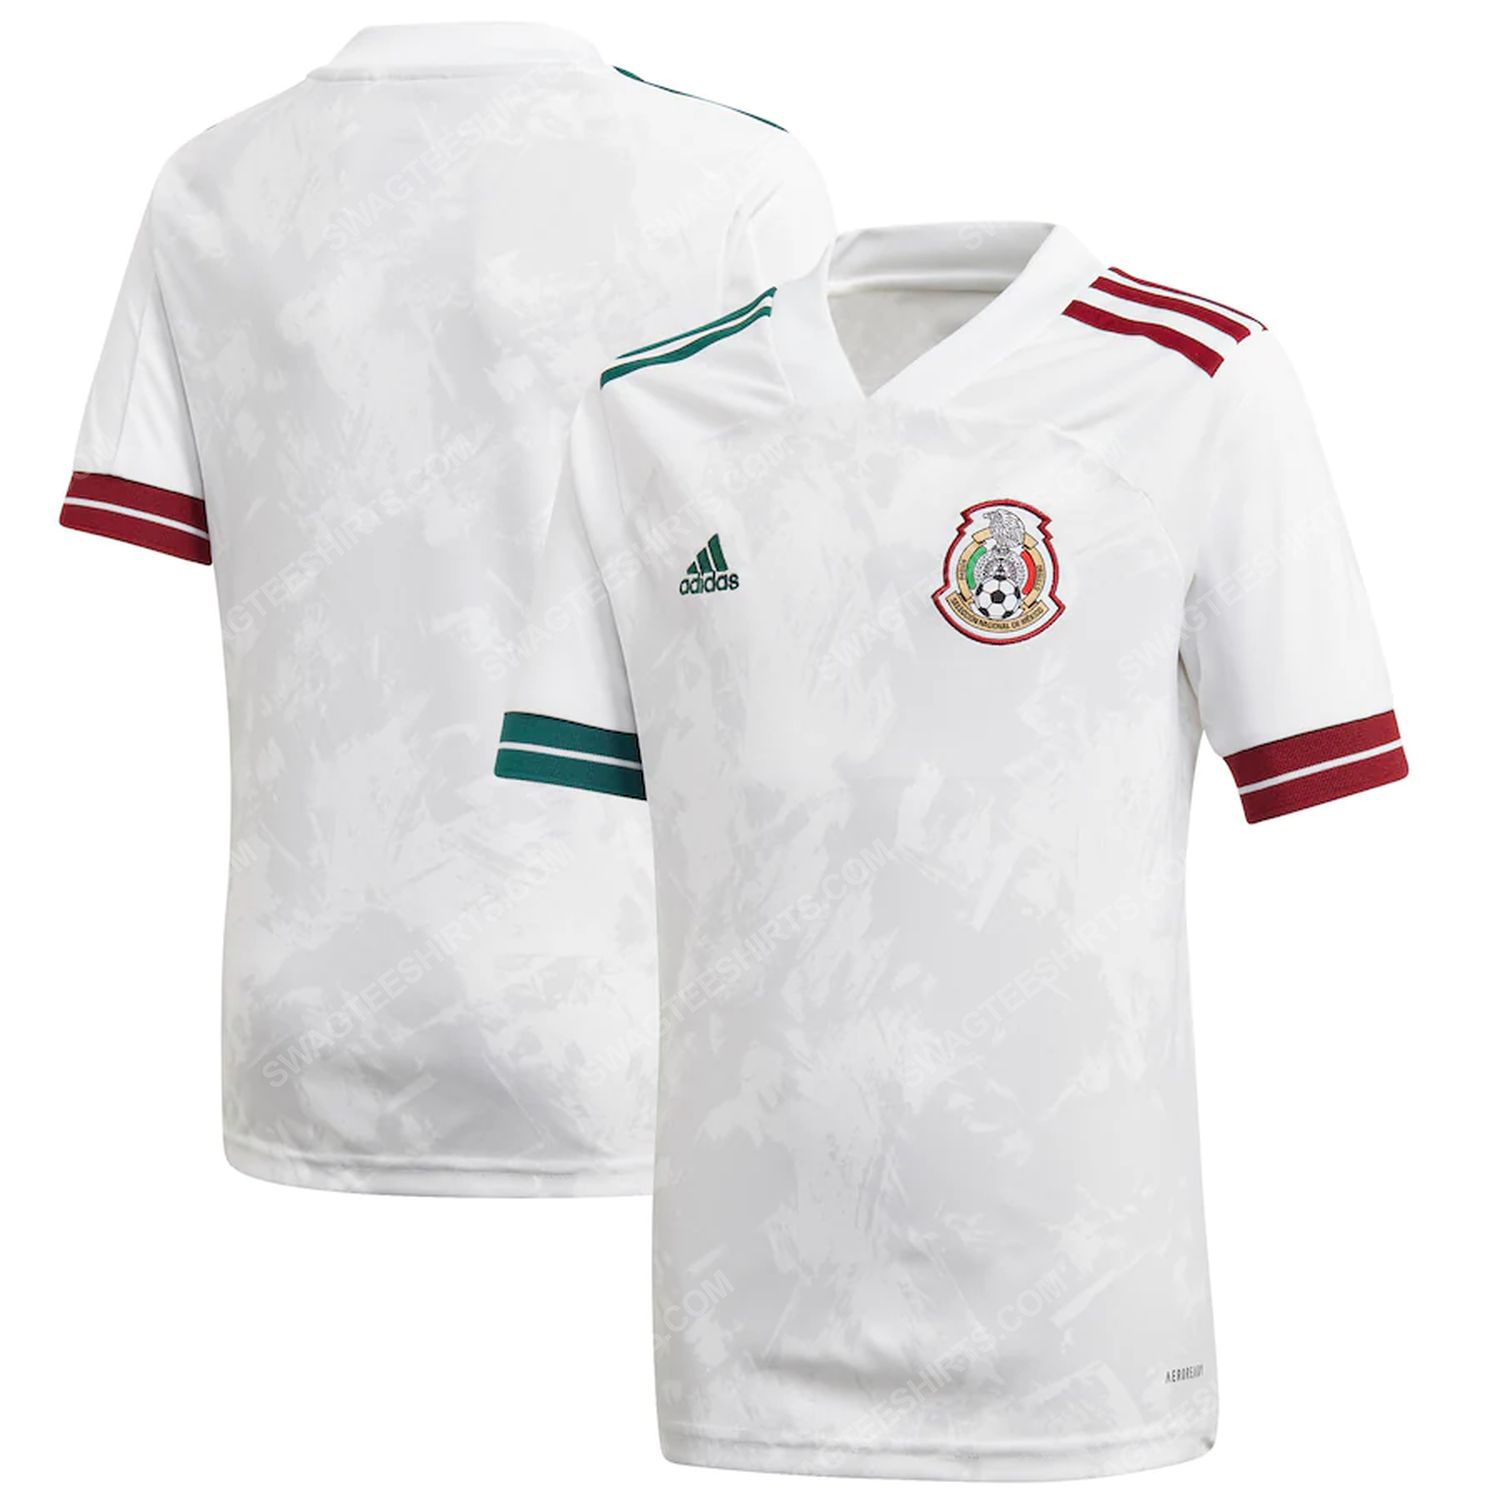 [special edition] The mexico national football team football jersey – Maria